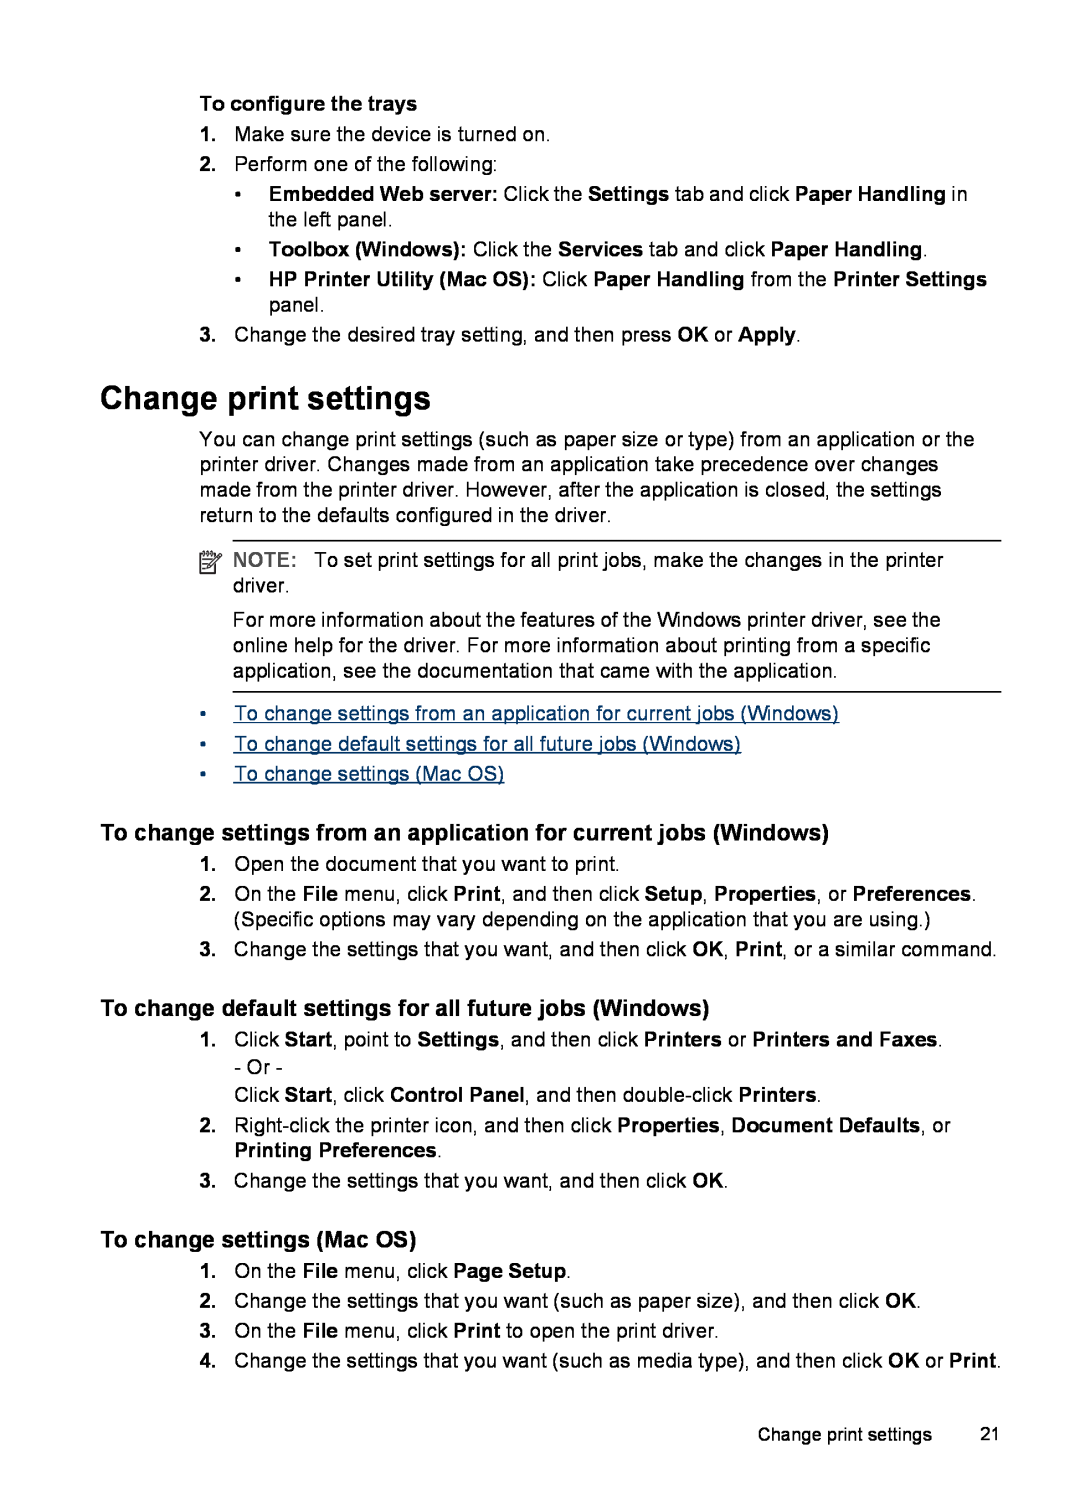 HP K5400 Change print settings, To change settings from an application for current jobs Windows, To change settings Mac OS 